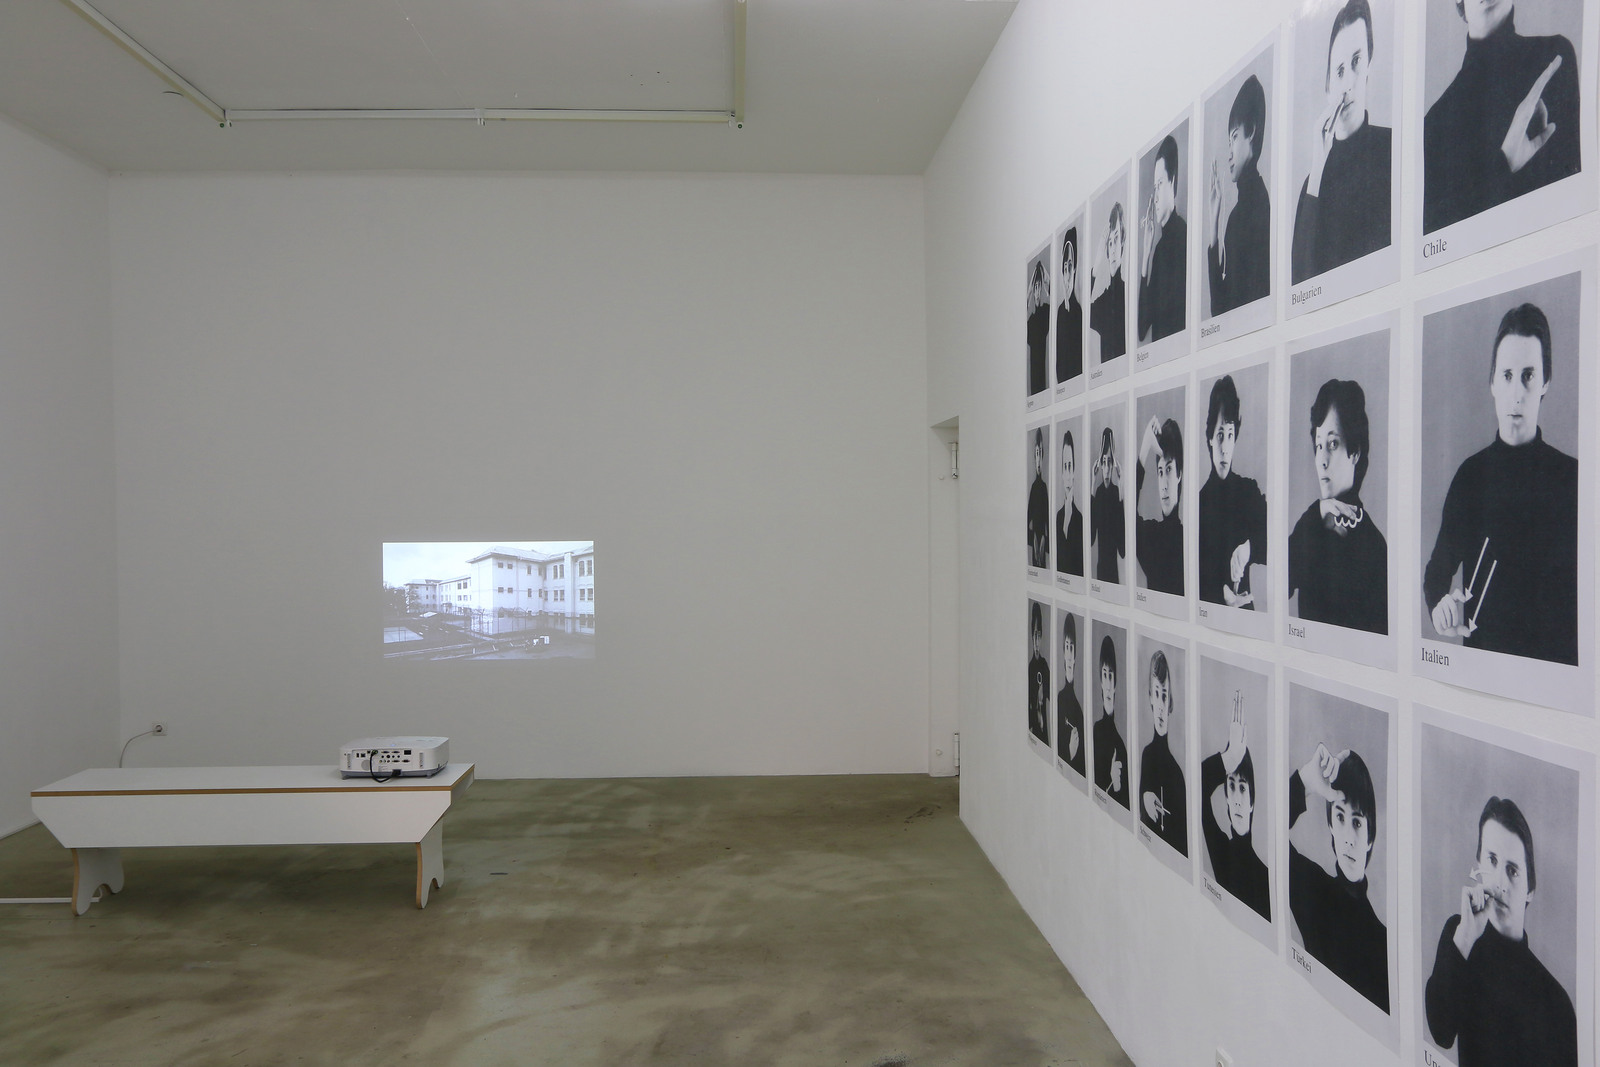 1-soy-capitan-the_order_of_things-installation view-1